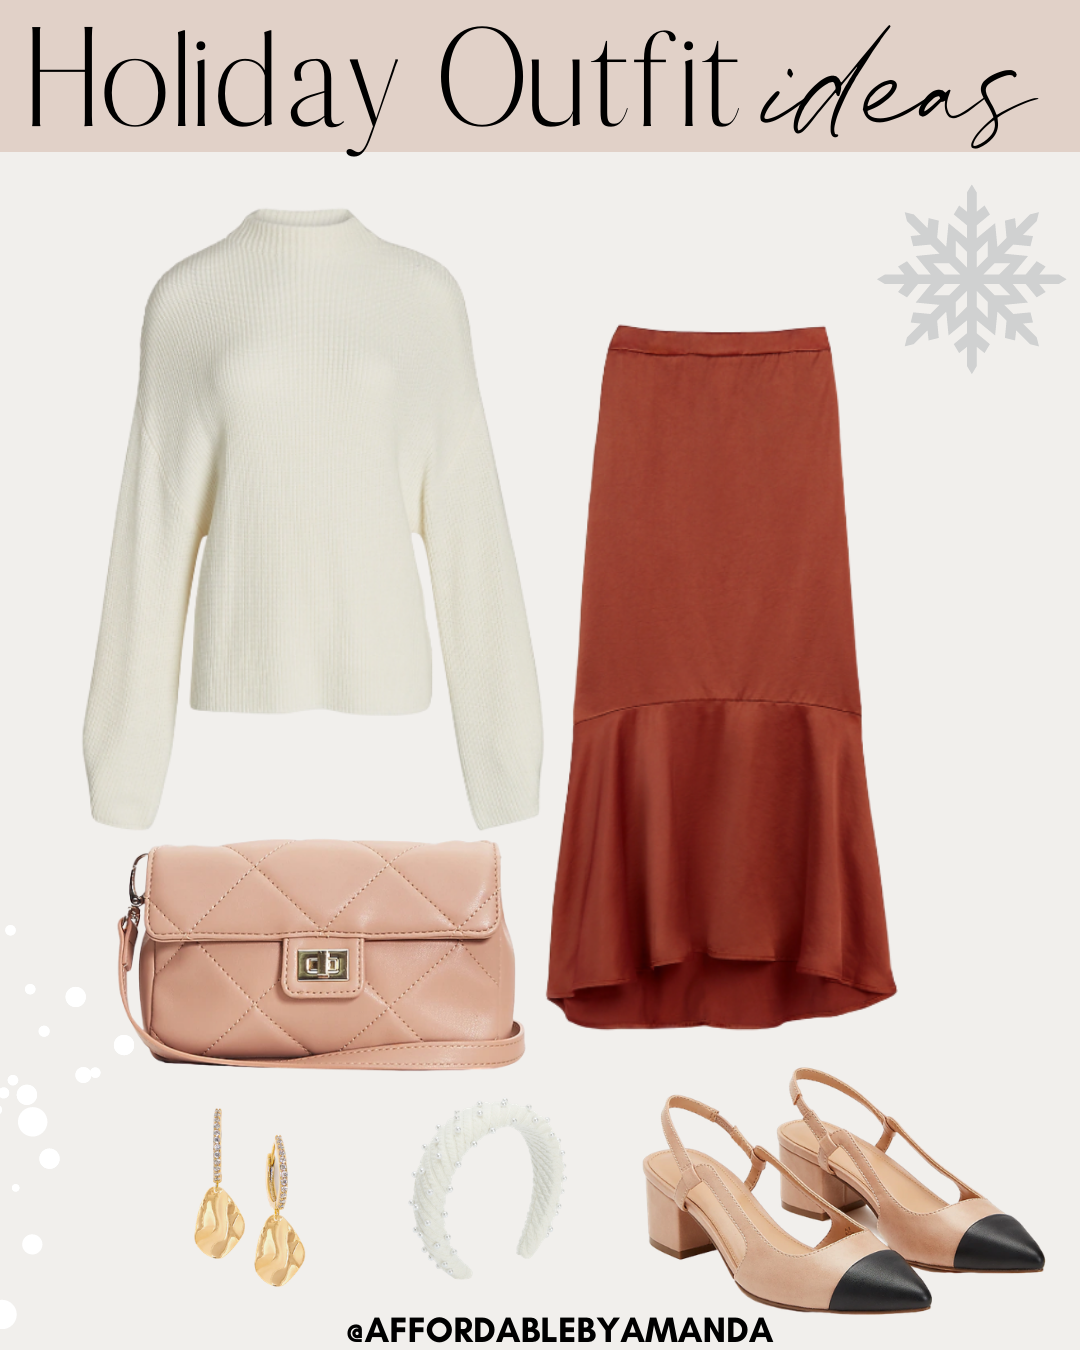 20 Holiday Outfit Ideas for 2020 - Holiday Fashion Trends 2020 - Best Holiday Outfits